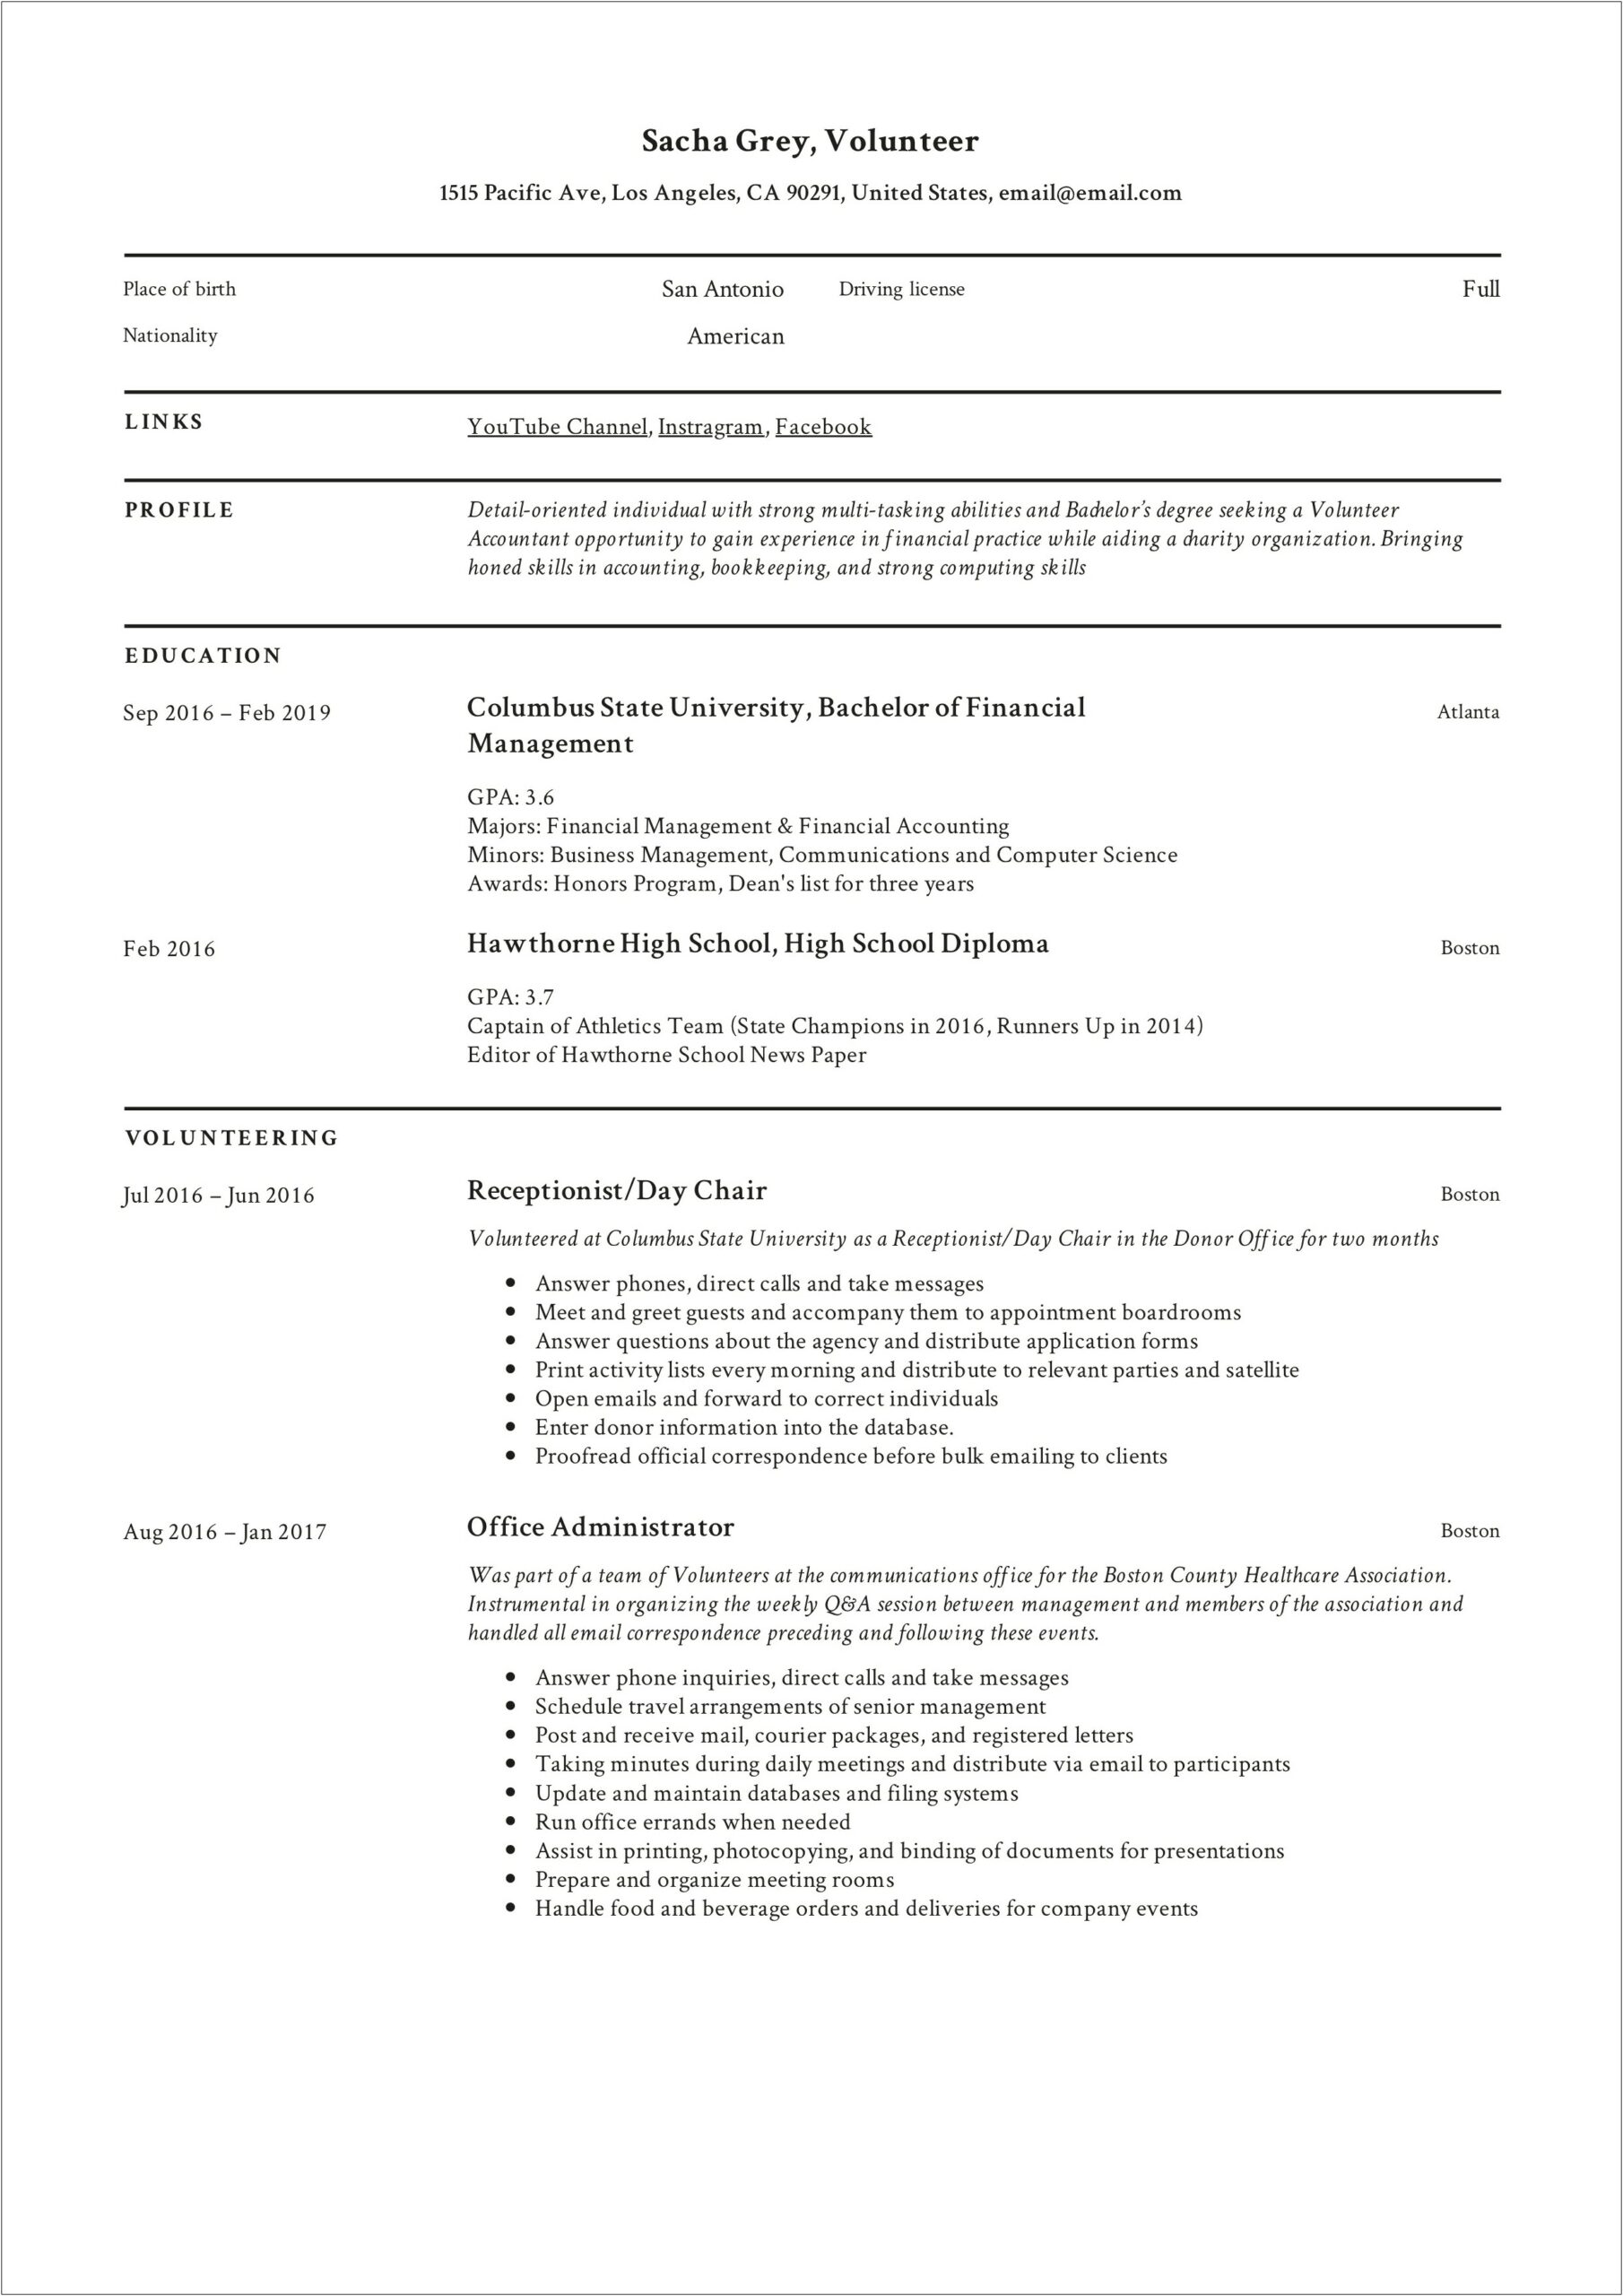 Chronological Resume Format With Volunteer Experience